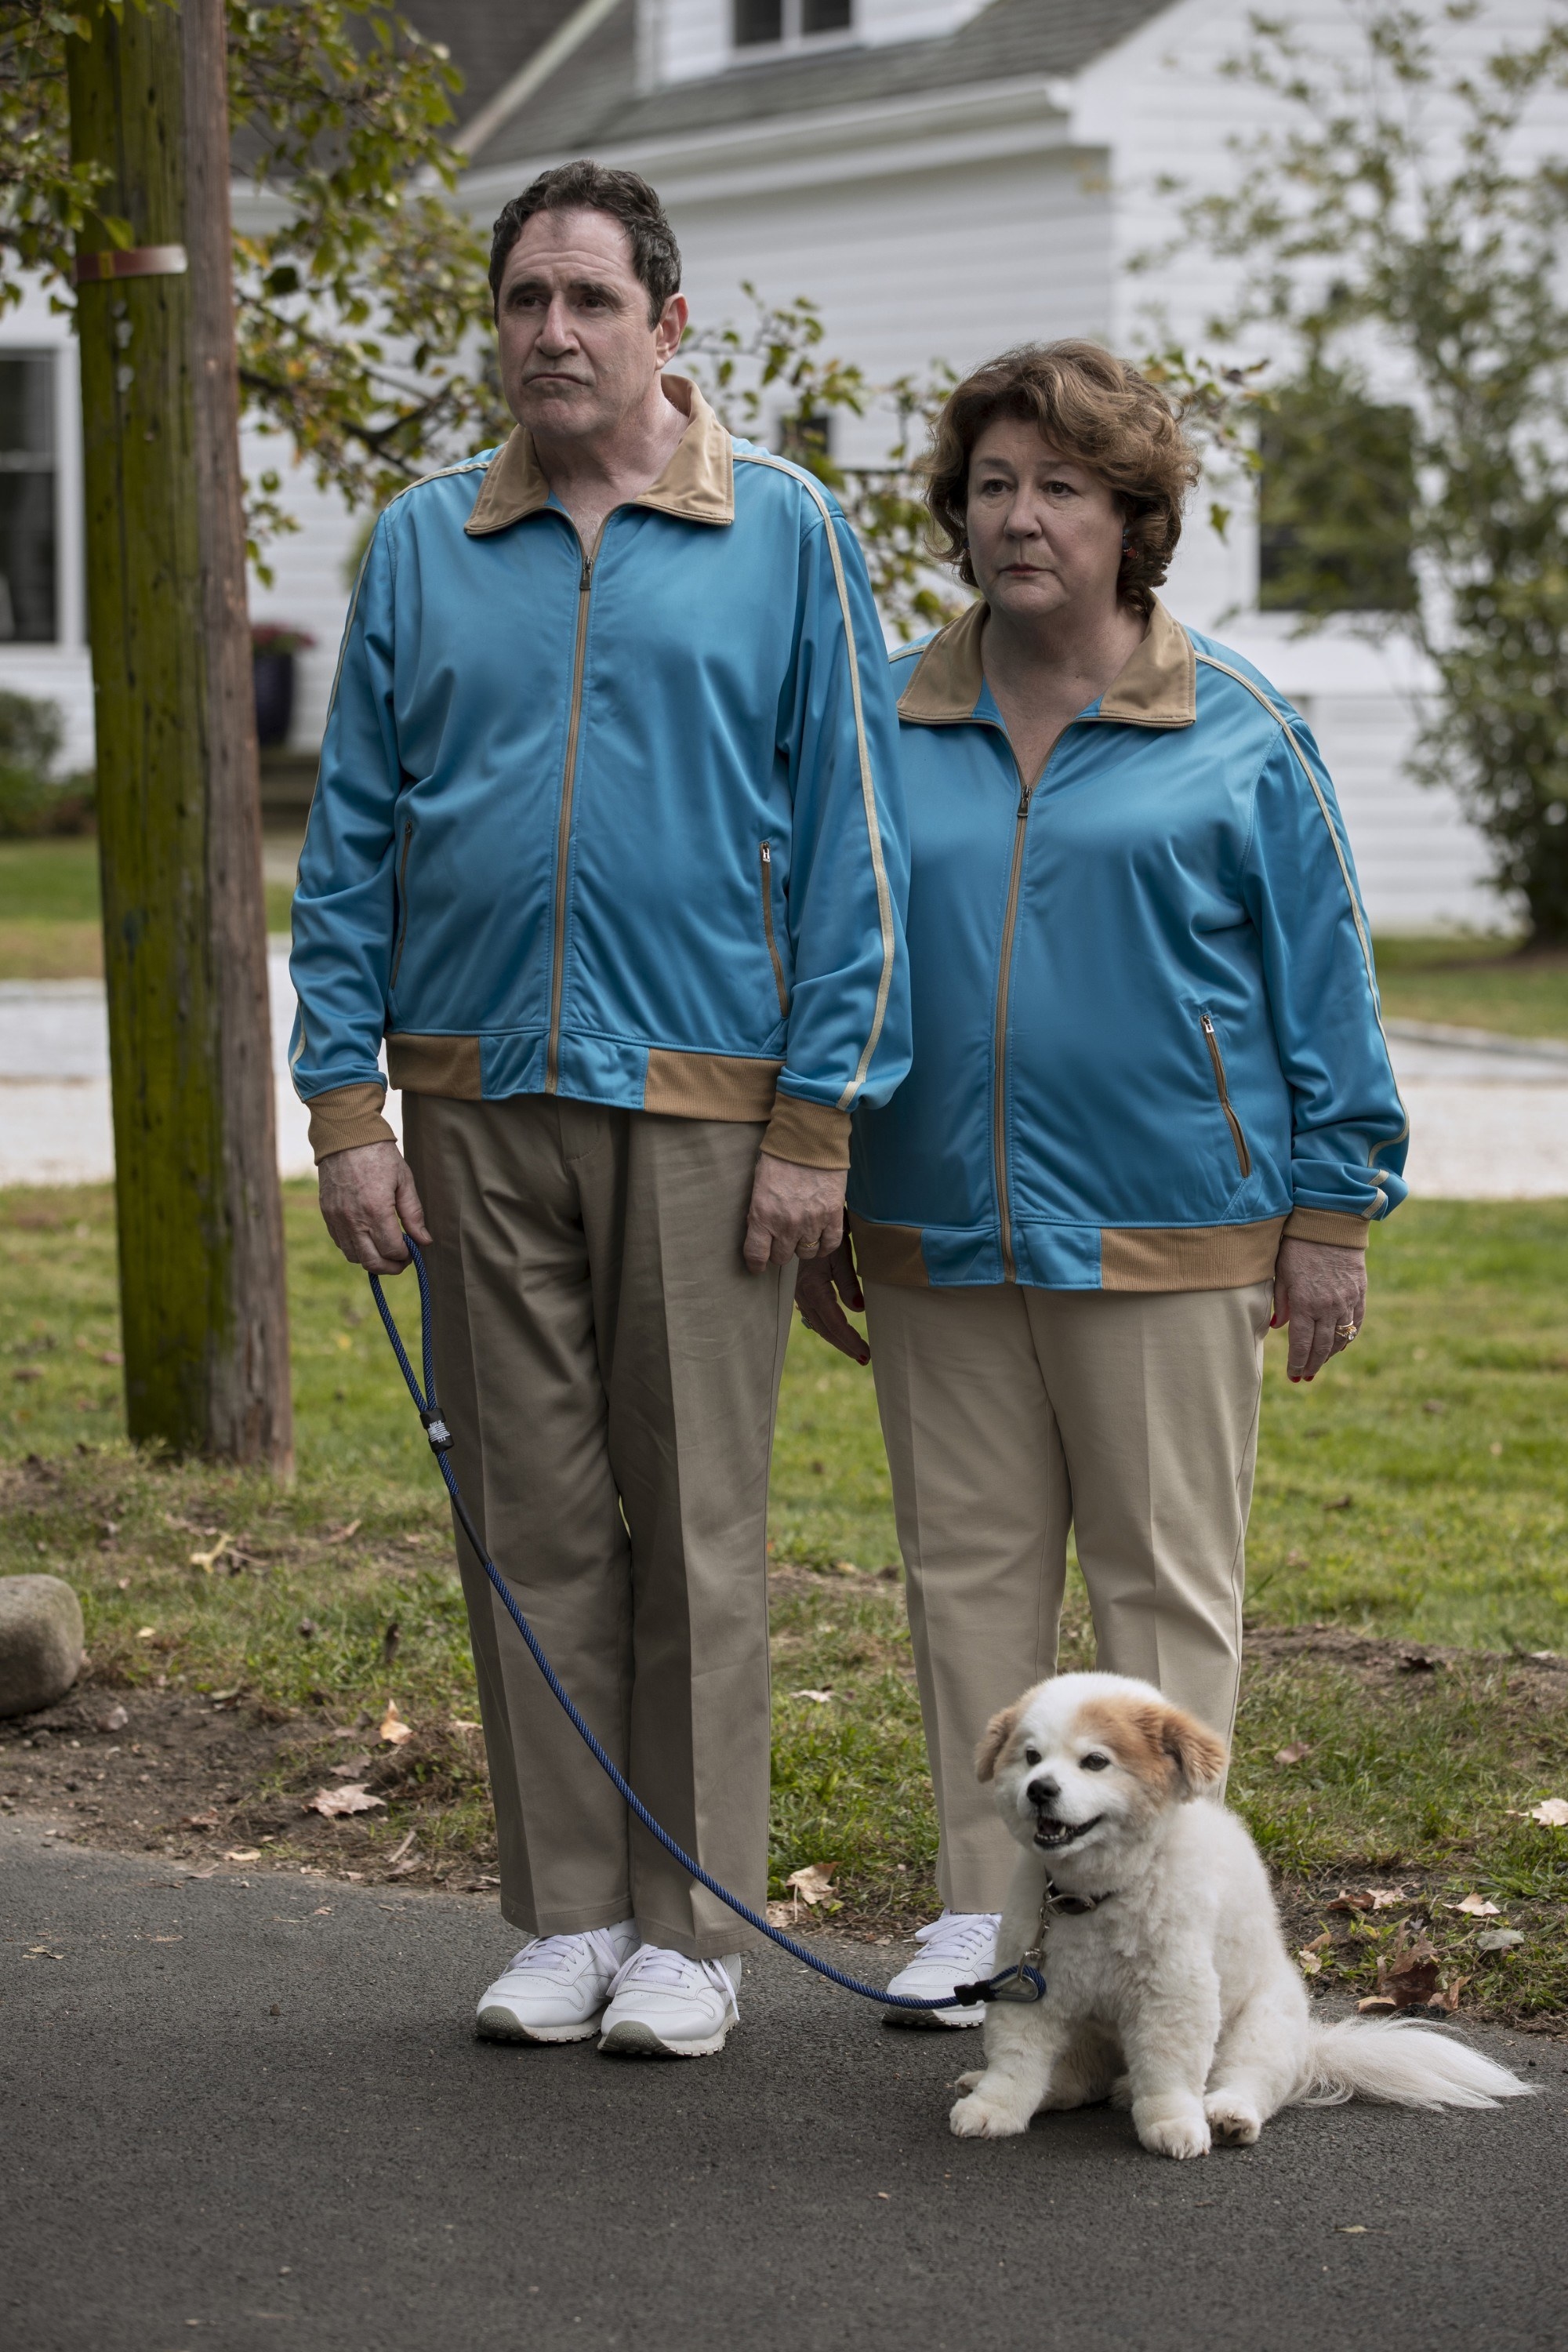 Kind and Martindale in matching jogging suits and walking their dog in &quot;The Watcher&quot;